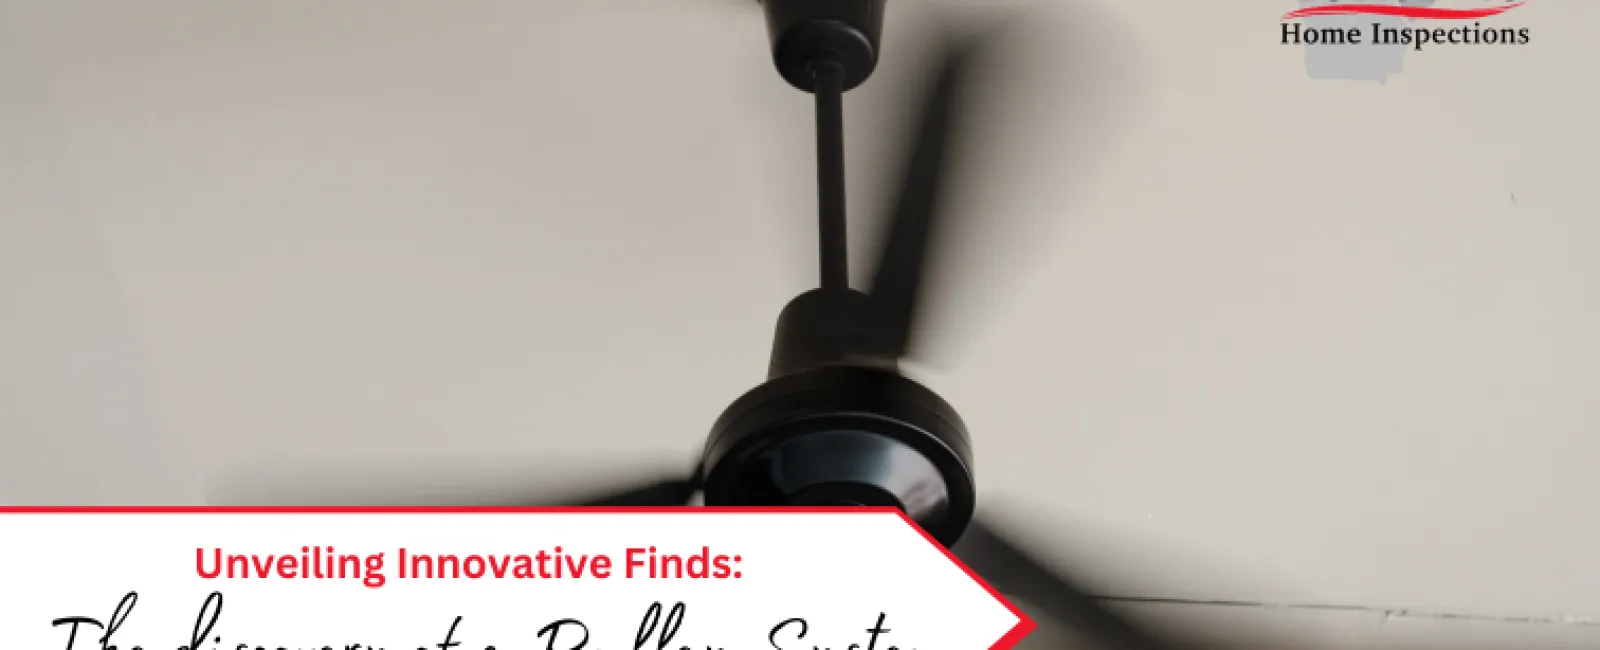 Unveiling Innovative Finds: The Discovery of a Pulley System Fan During a Home Inspection